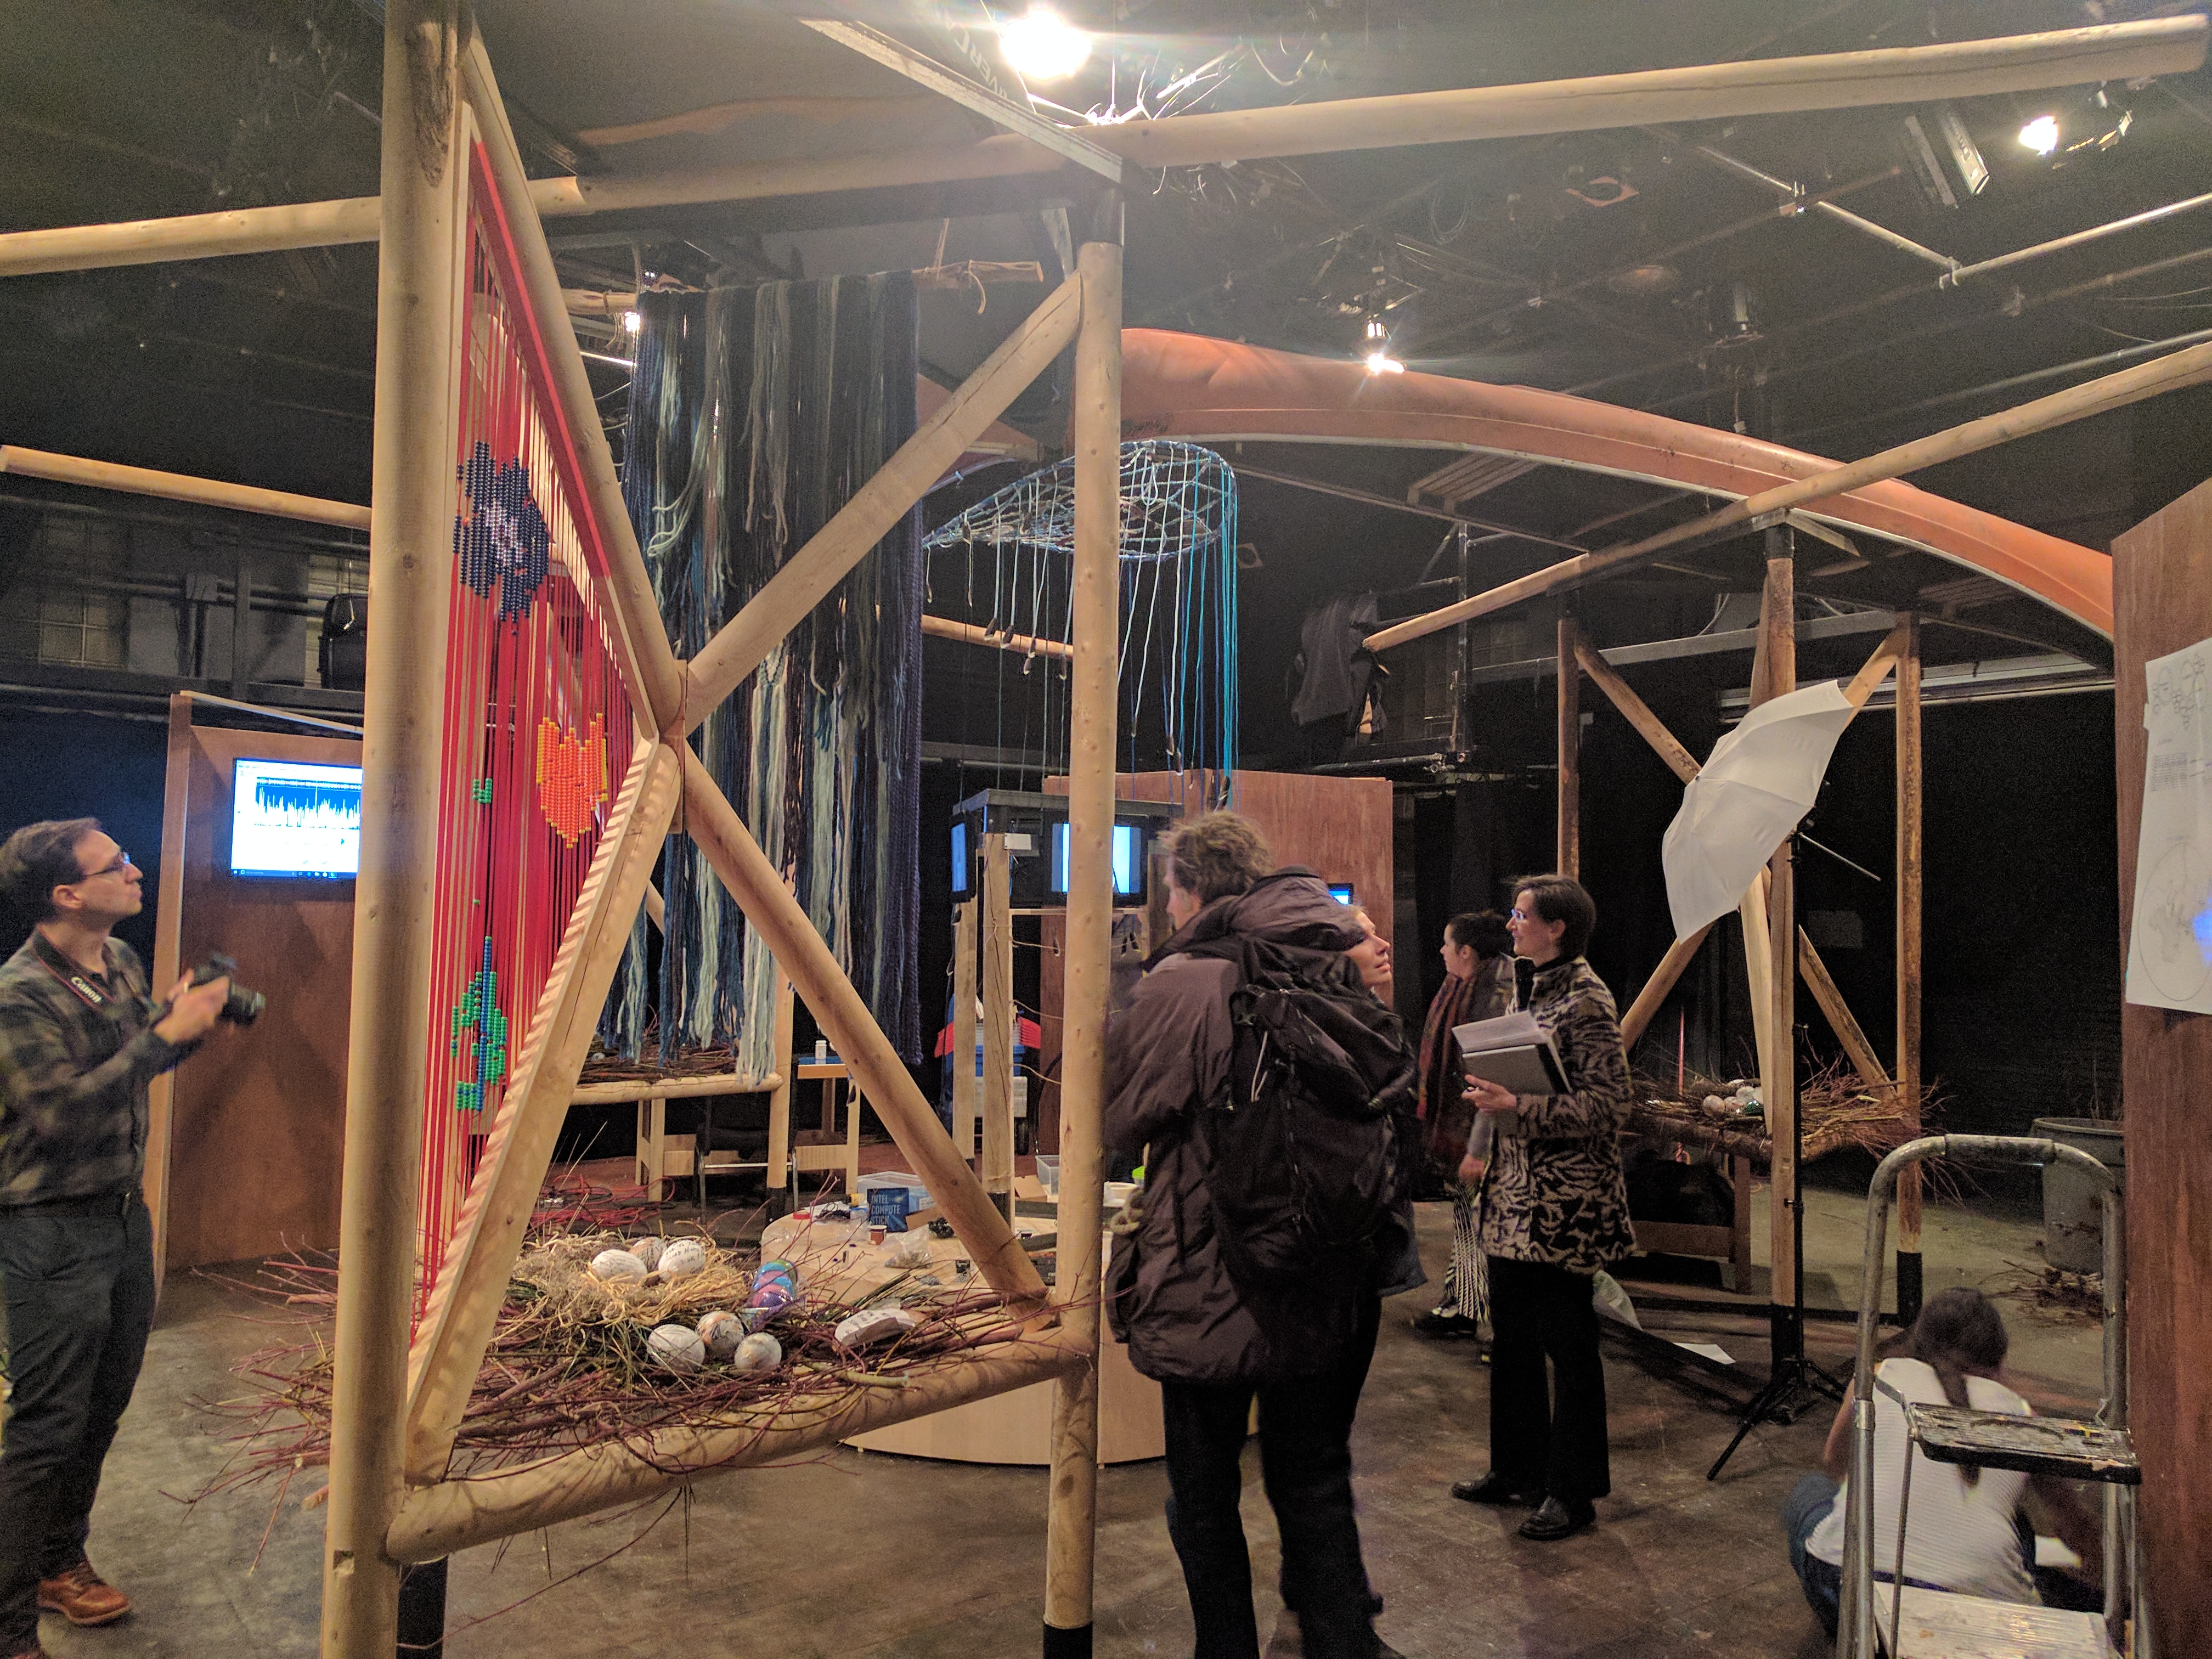 The Delta Days traveling exhibit - seen here during construction - was Susan's first major collaboration with the School of Environment and Sustainability.